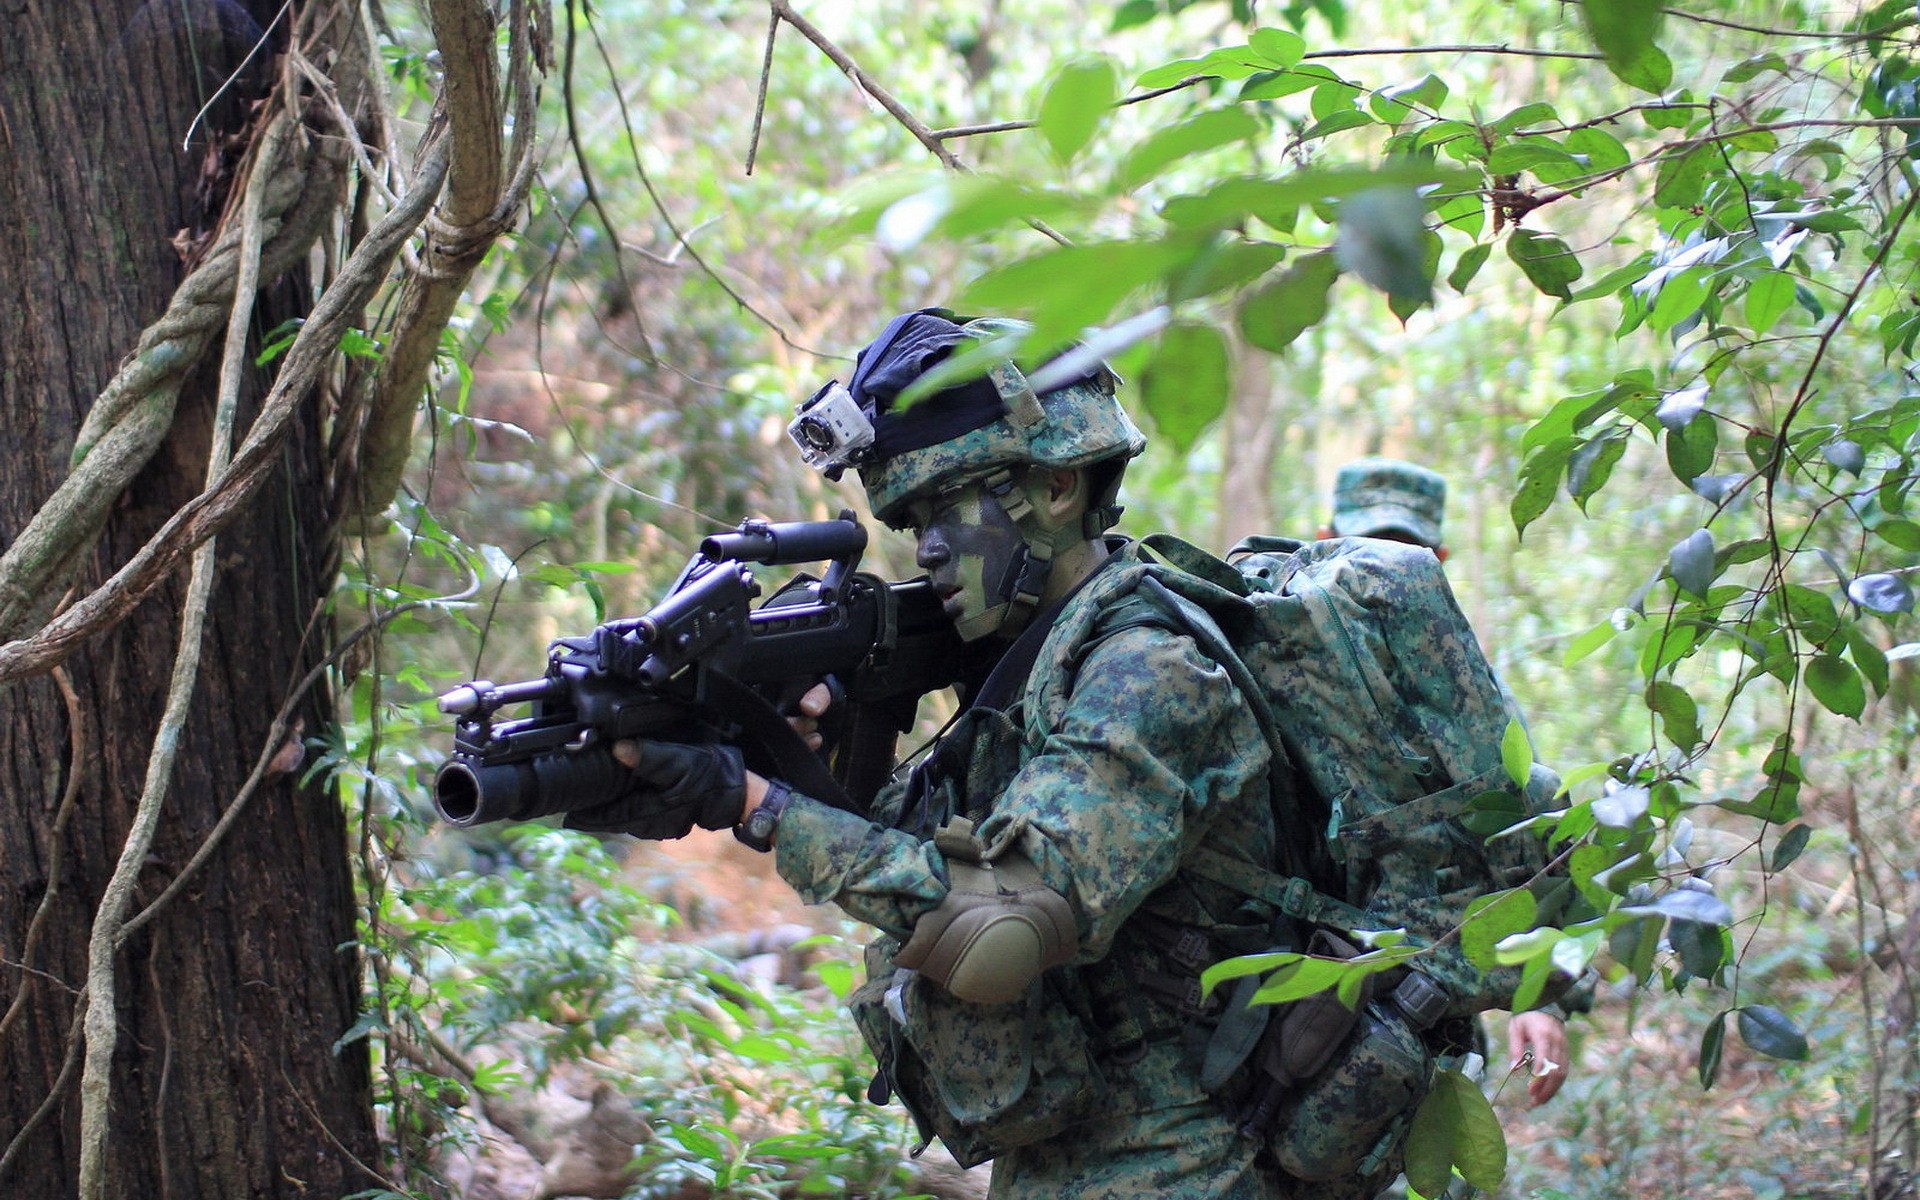 soldier, SAR 21, Army Gear, Weapon, Assault Rifle, Singapore, Grenade